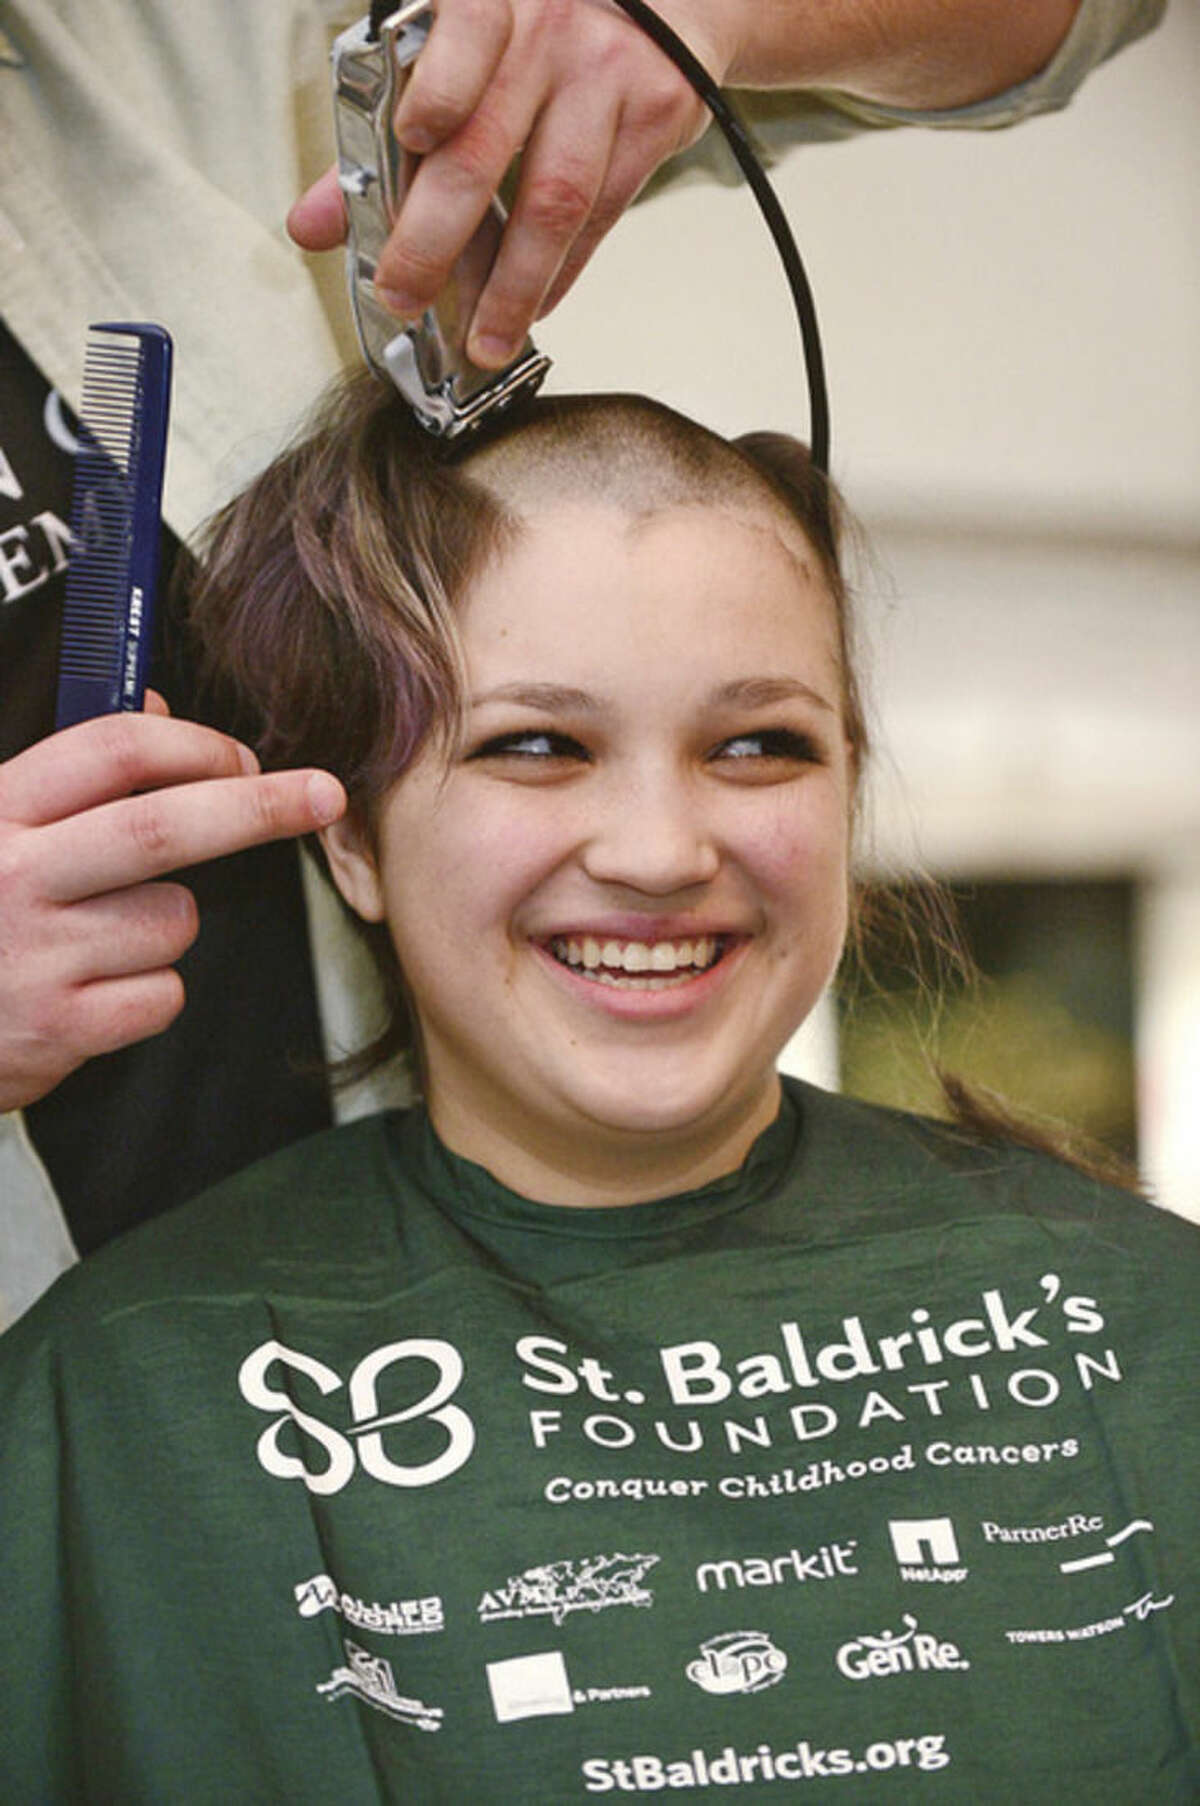 Hour photo / Erik Trautmann - Shannon Maguire gets her head shaved to raise money for cancer research. O'Neill's Irish Pub in Norwalk sponsored a St. Baldrick's Foundation signature head-shaving event to raise funds and awareness for lifesaving childhood cancer research on Saturday.